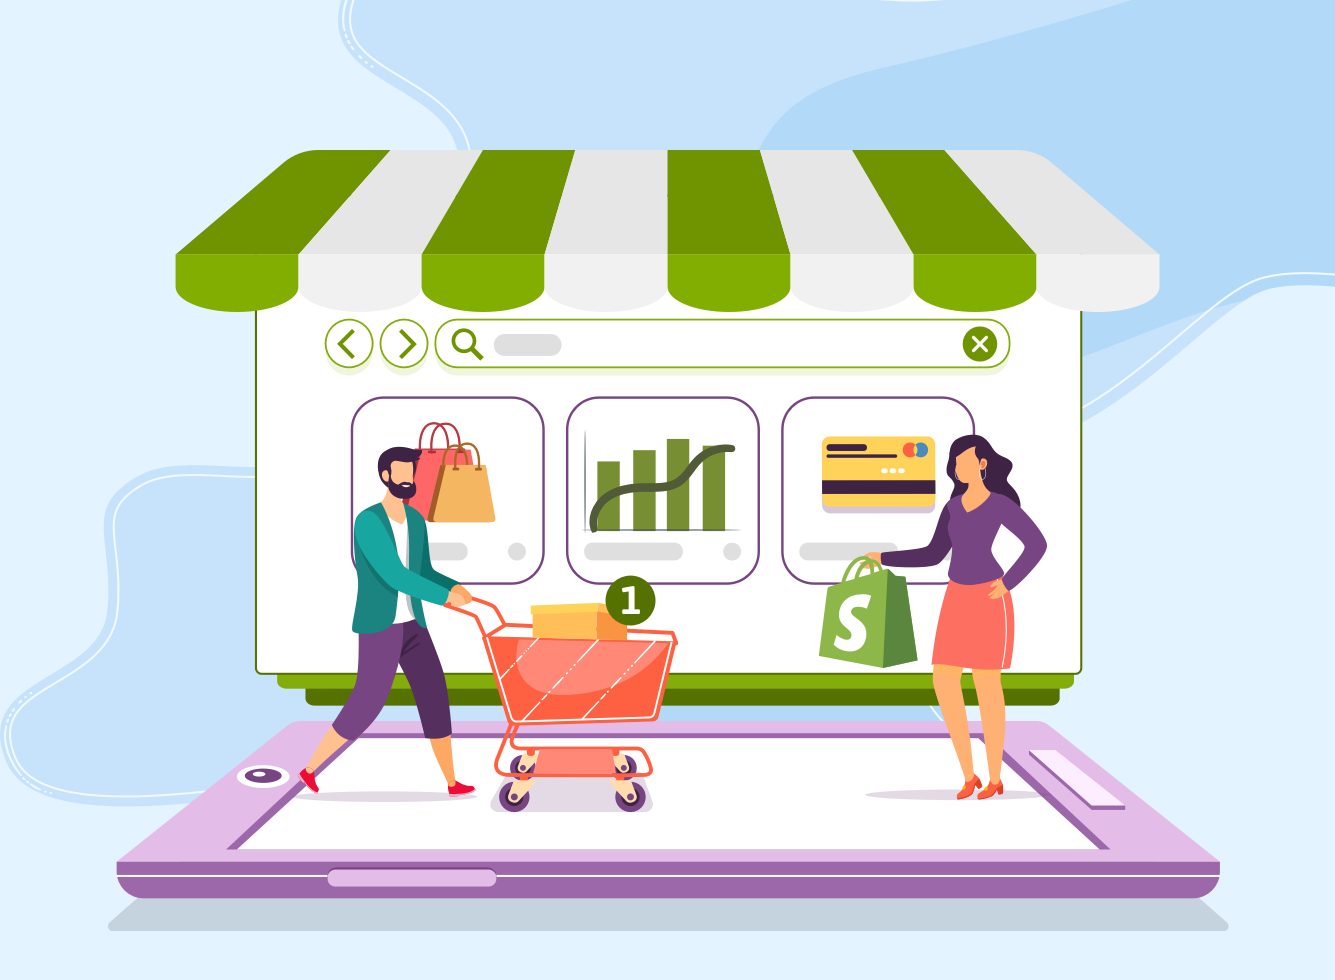 Introducing Shopify Online Store 2.0 – The Next Generation of Shopify eCommerce